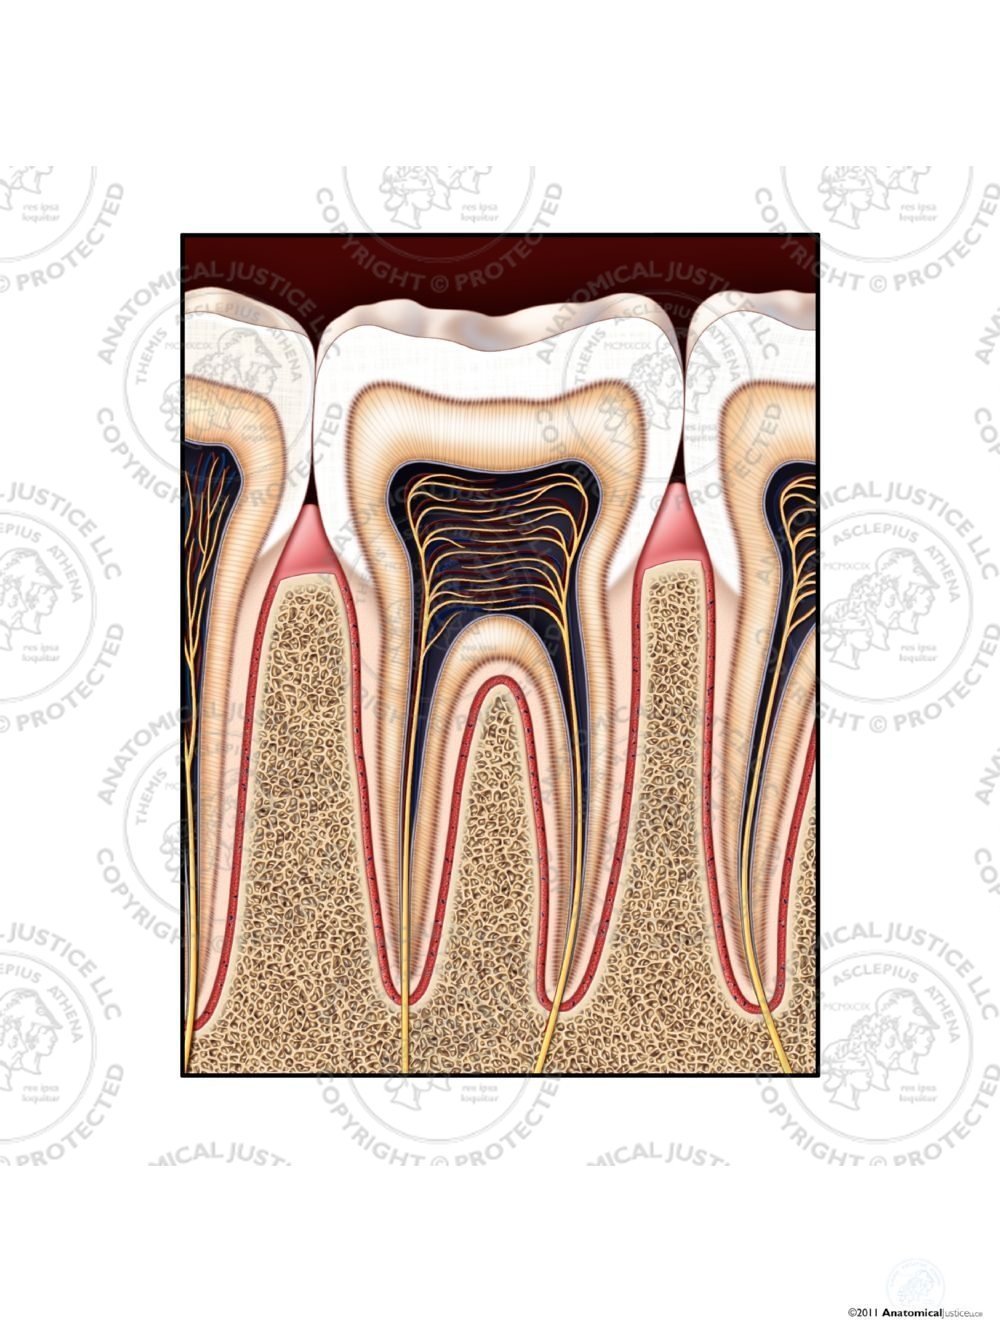 Anatomy of a Tooth – No Text